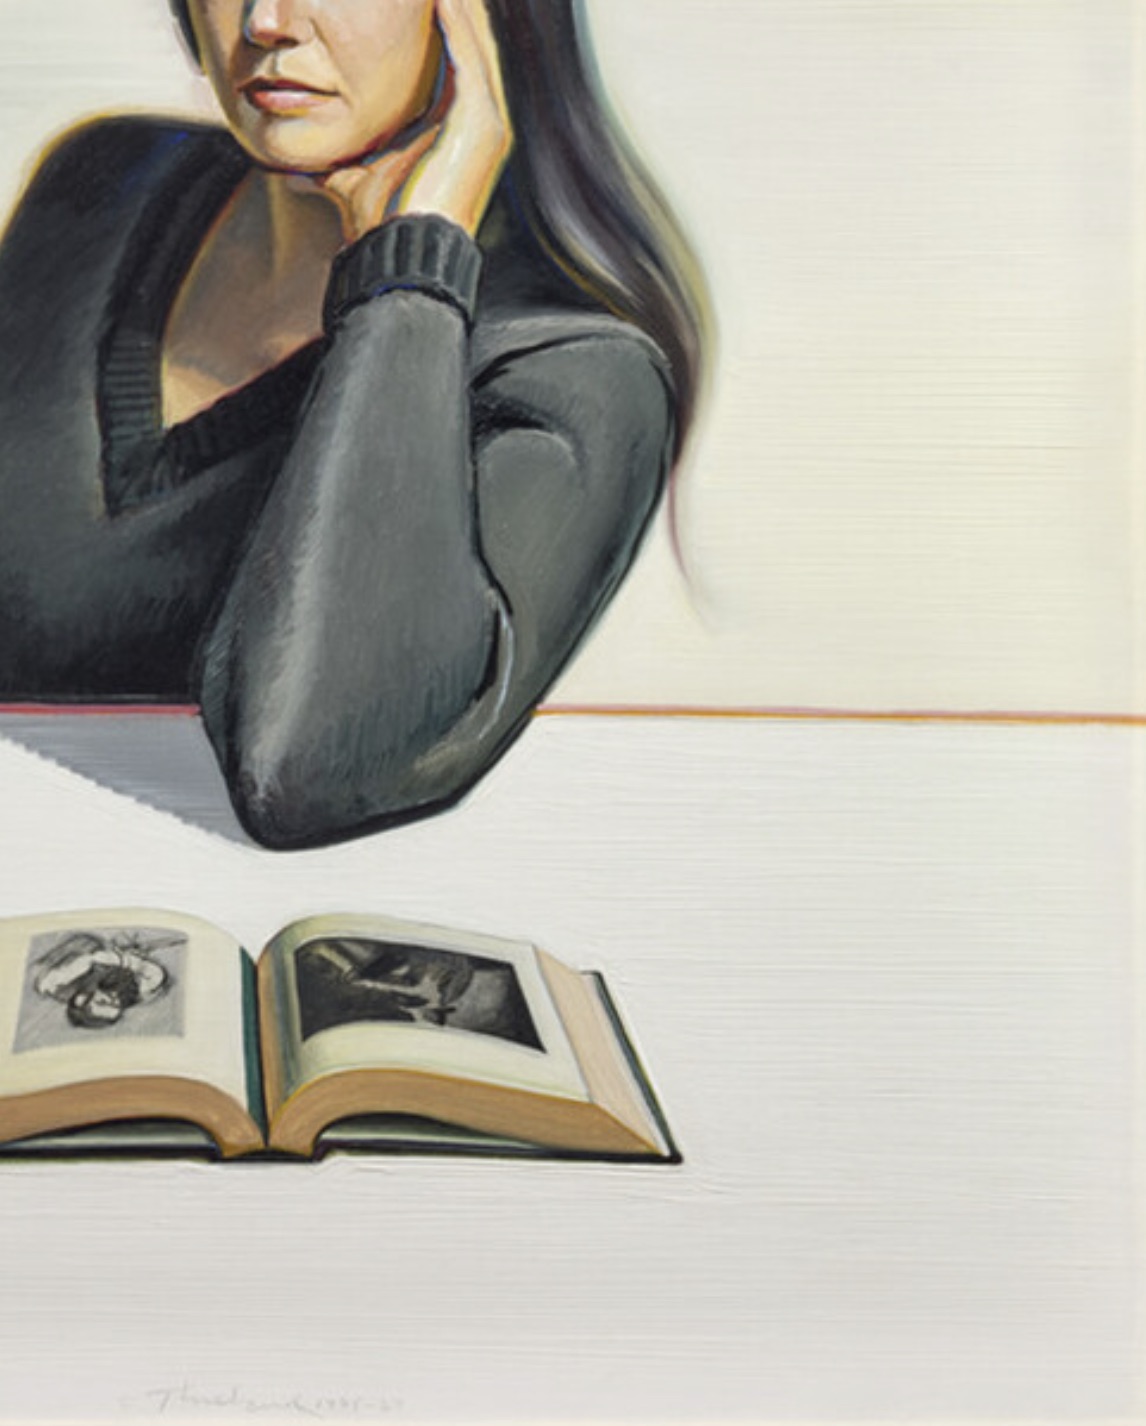 Wayne Thiebaud "Betty Jean Thiebaud and Book, 1969" Offset Lithograph - Image 5 of 5